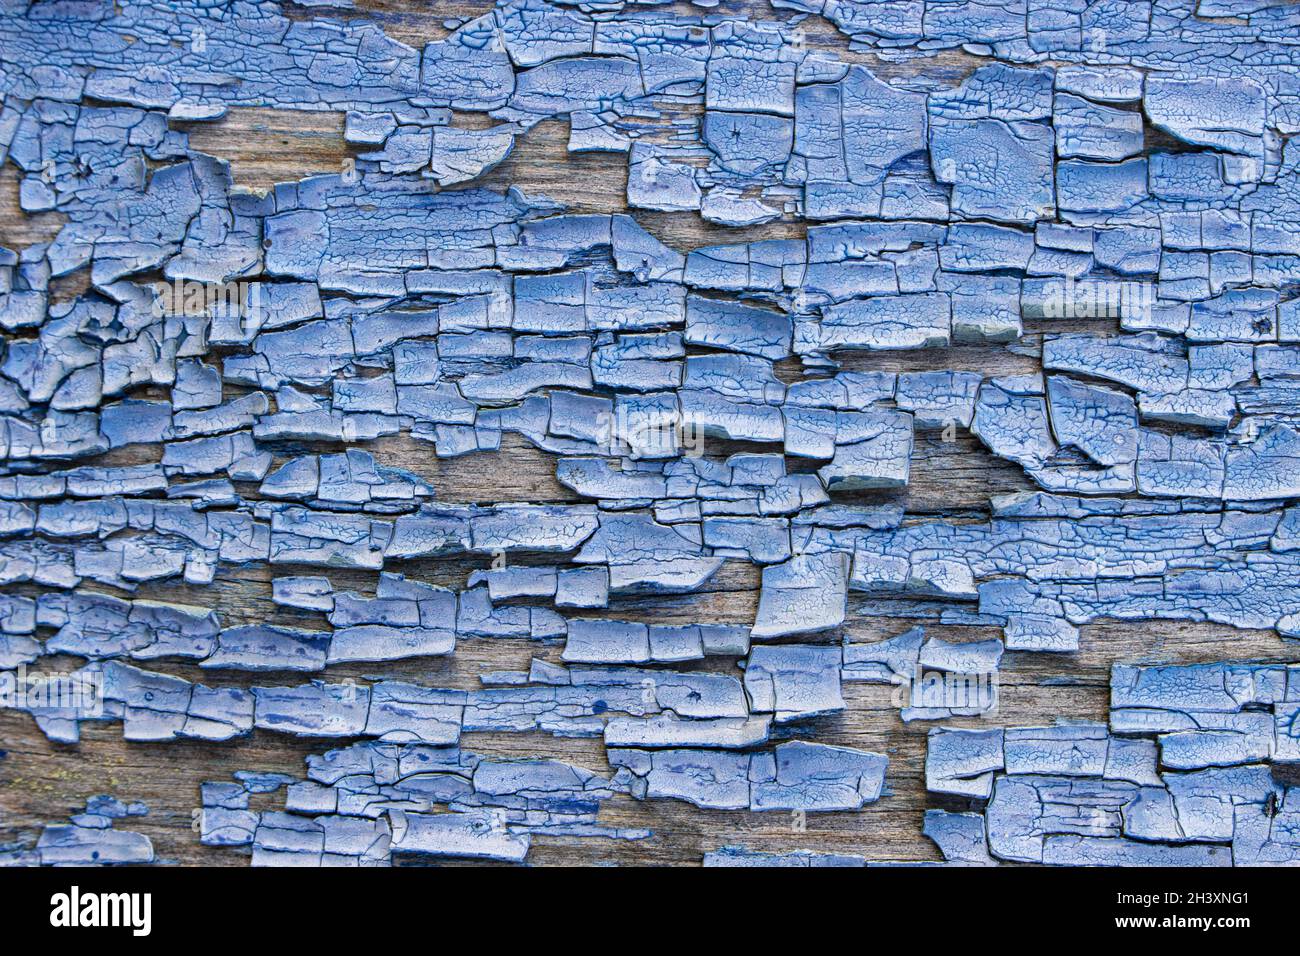 Abstraction of the body of old blue cracked paint on a wooden surface. Stock Photo